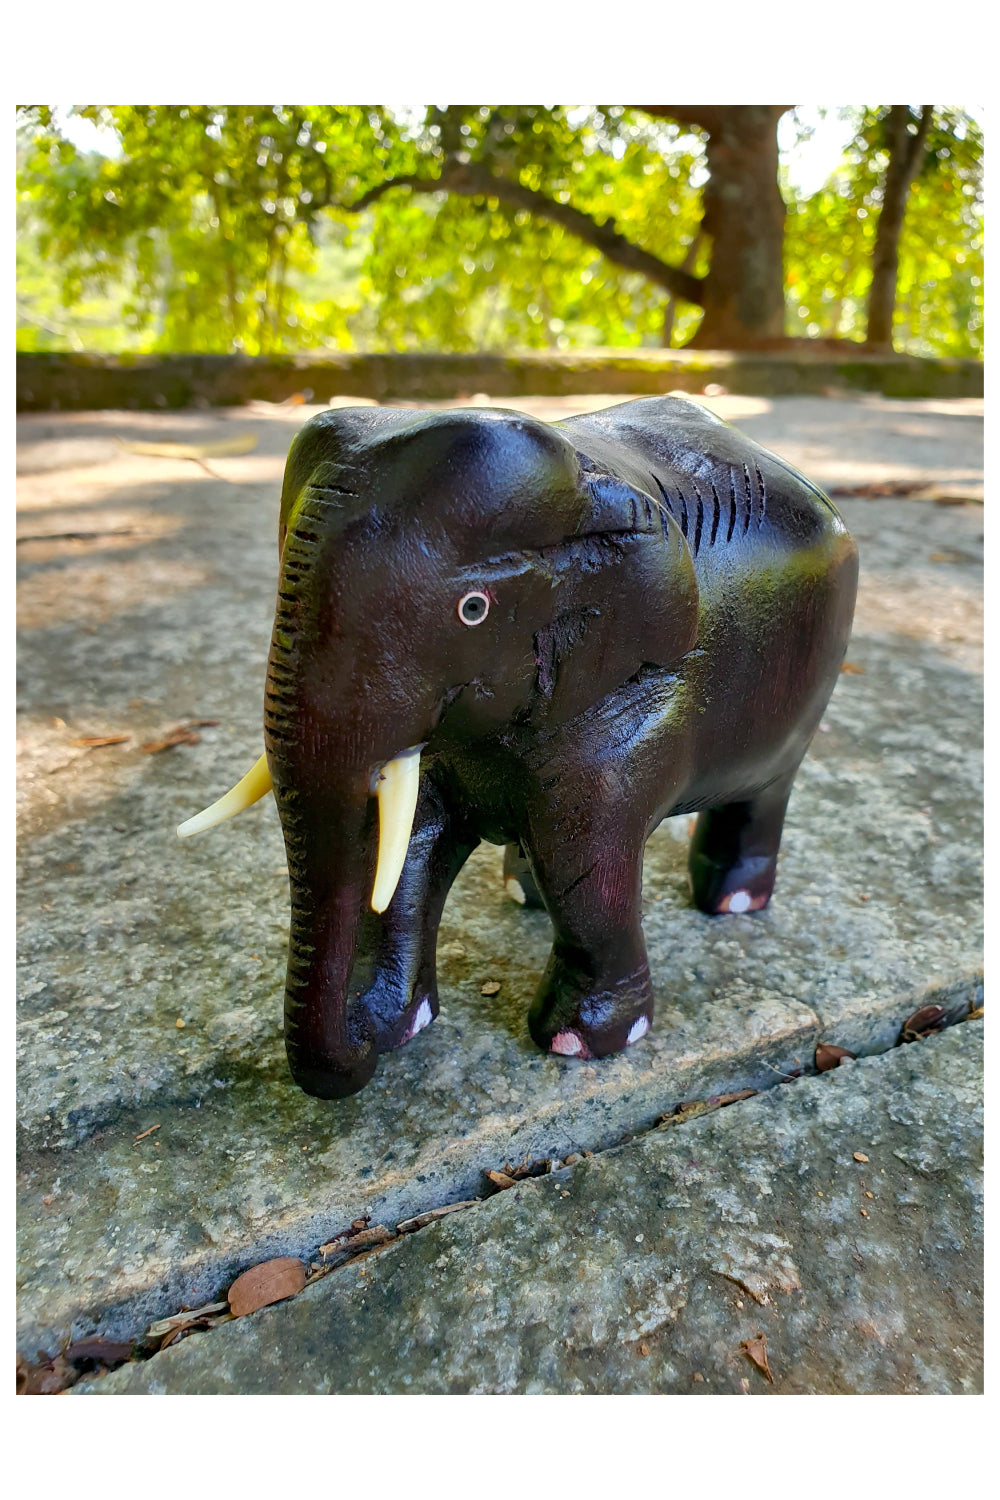 Southloom Handmade Elephant Handicraft (Carved from Mahogany Wood) 4 Inches